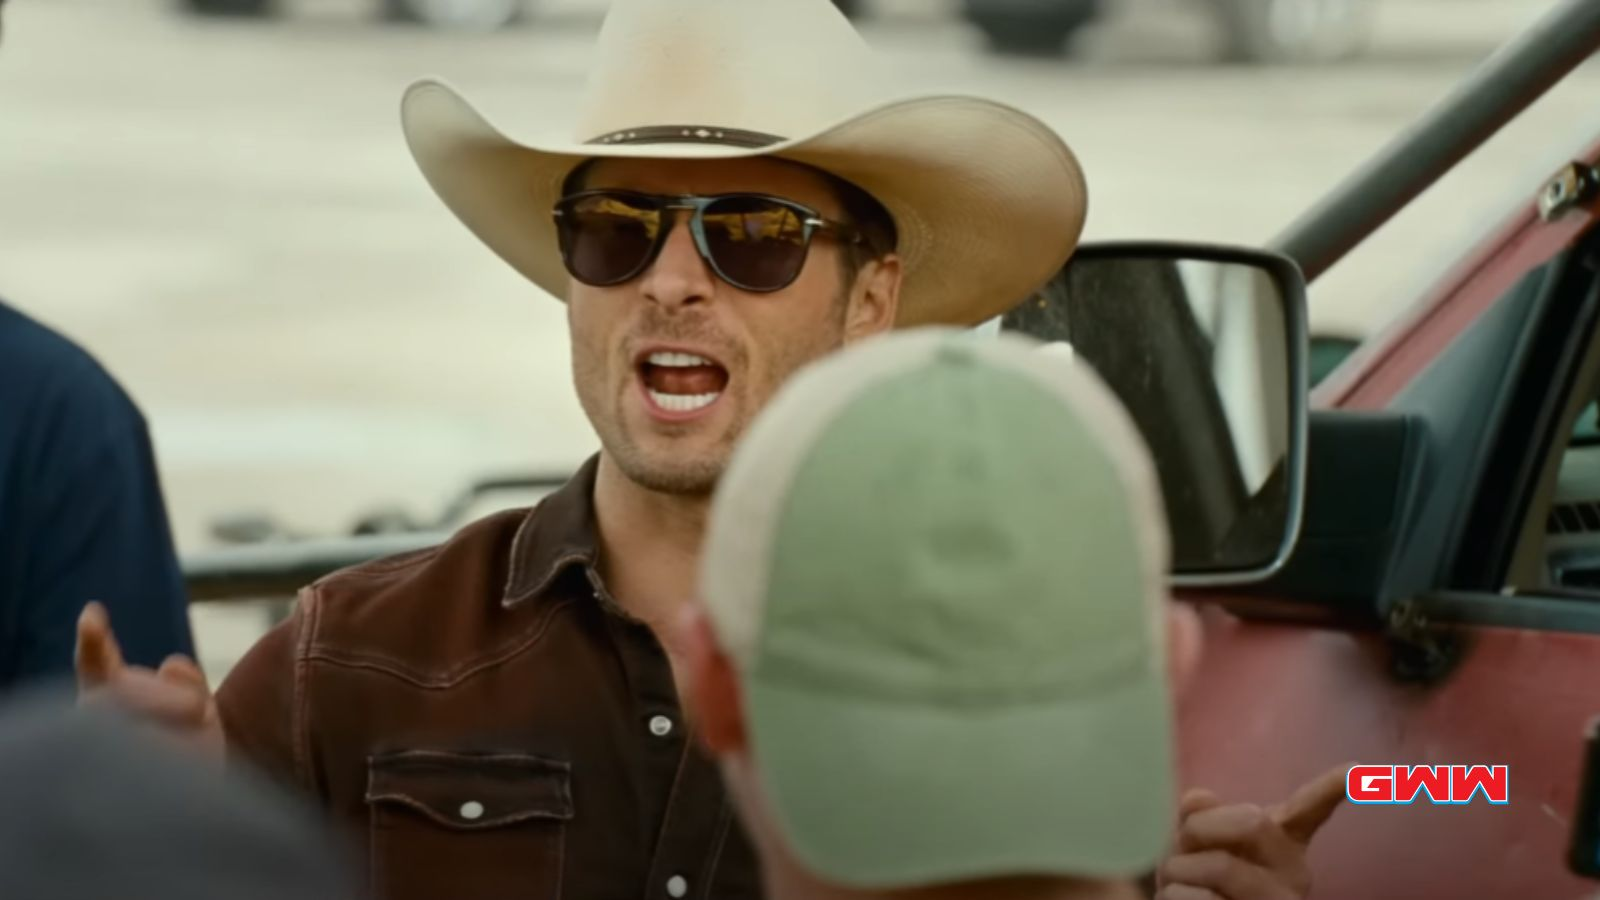 Tyler Owens wearing a cowboy hat and sunglasses, speaking passionately outdoors.